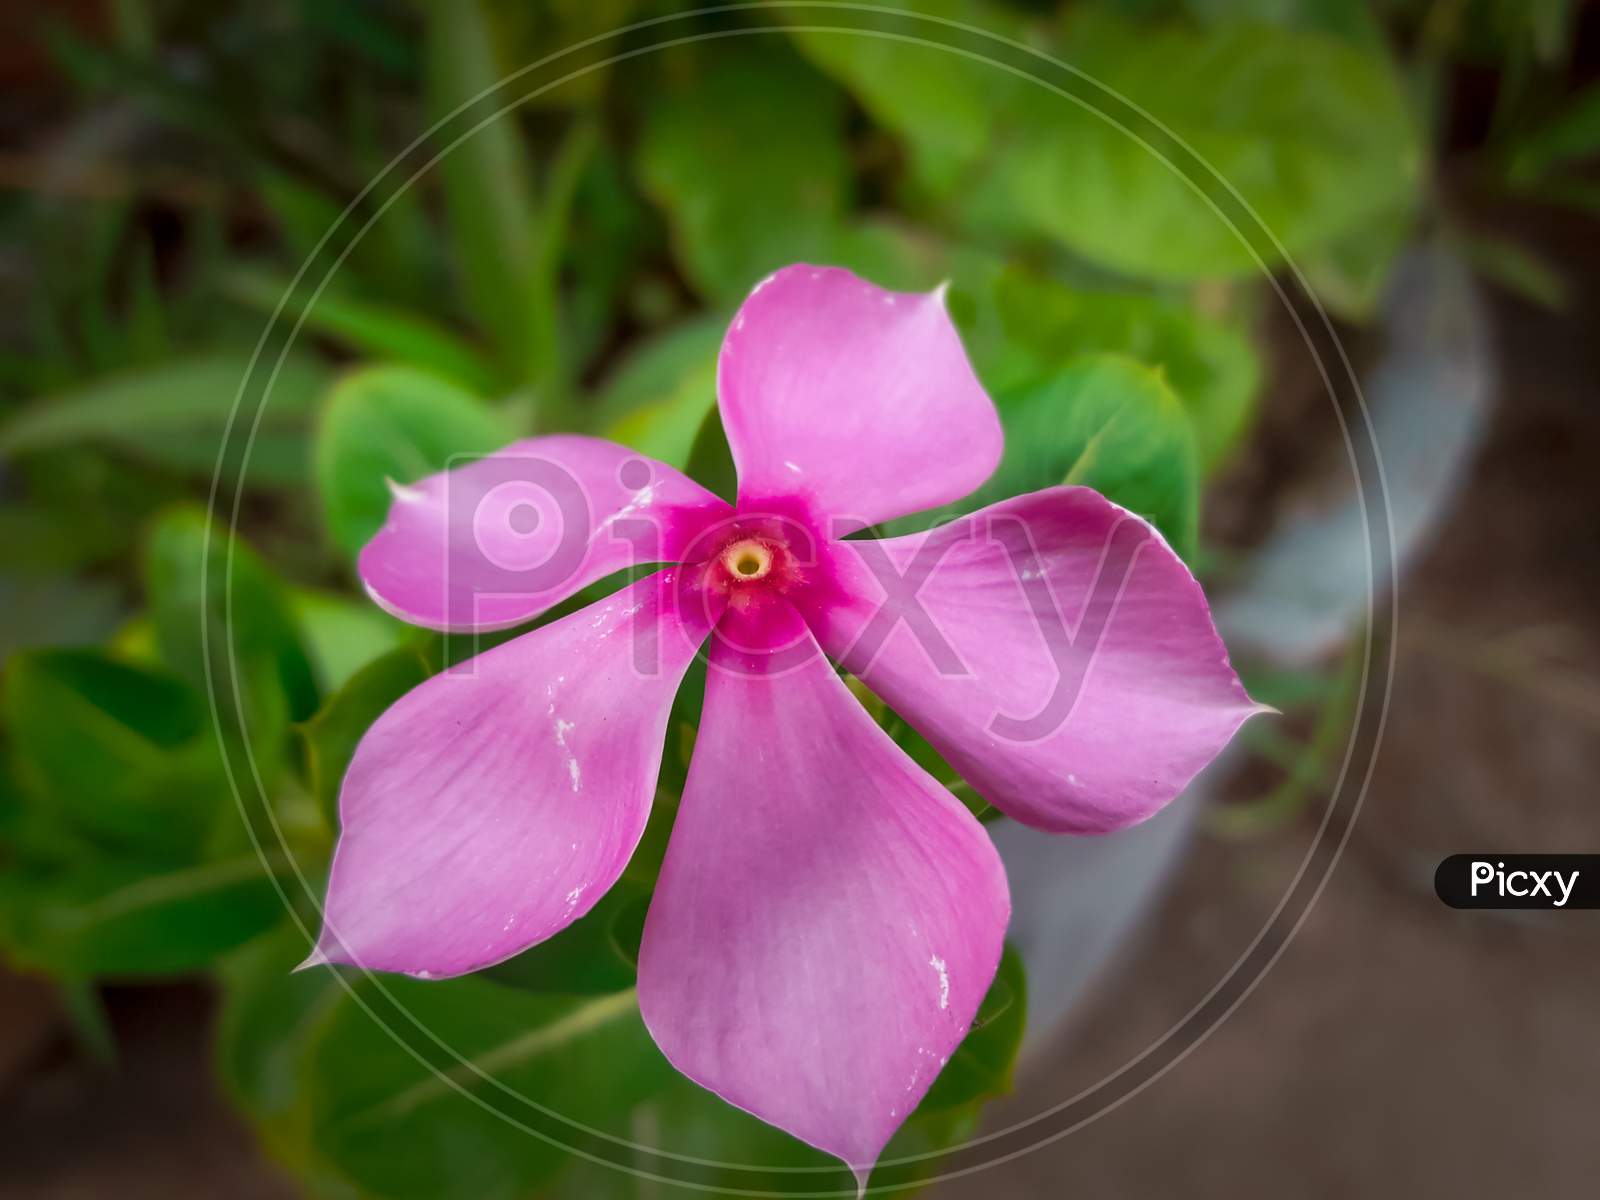 Pink Flower With Green Leaves In Flower Pot